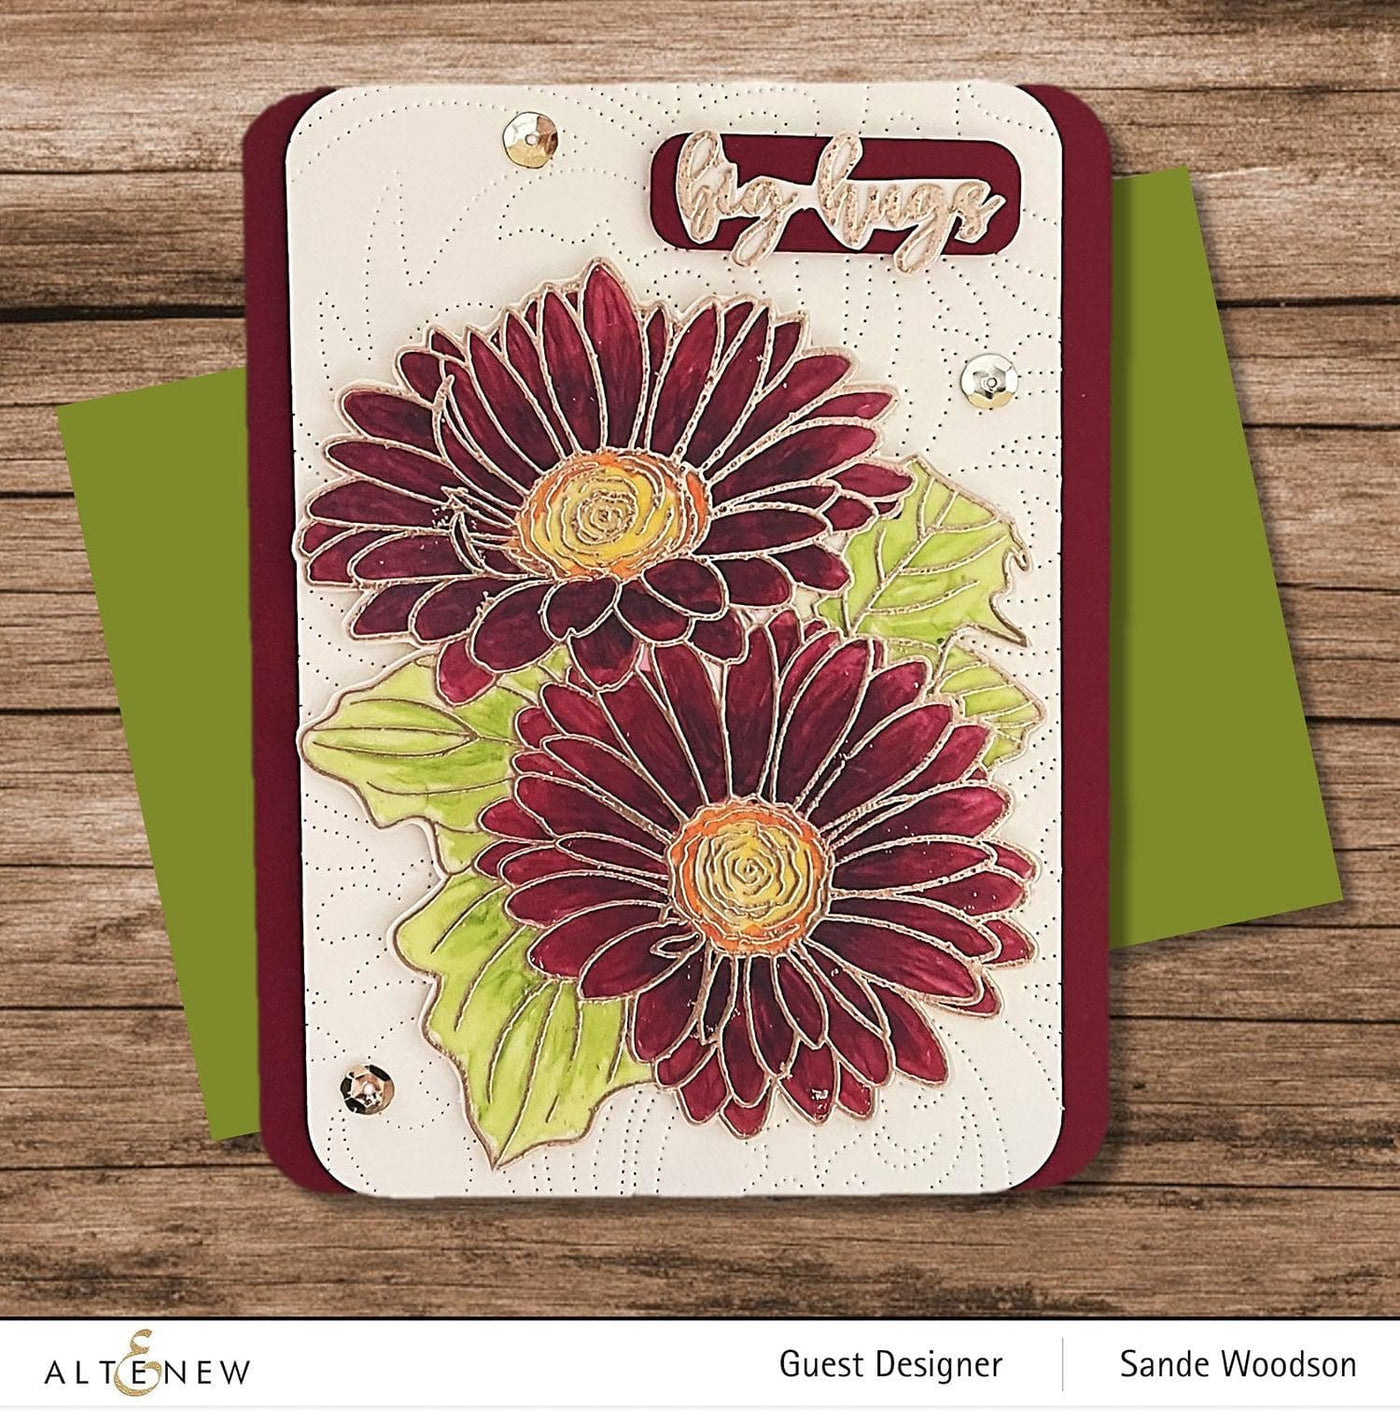 Photocentric Clear Stamps Paint-A-Flower: Gerbera Revolution Outline Stamp Set